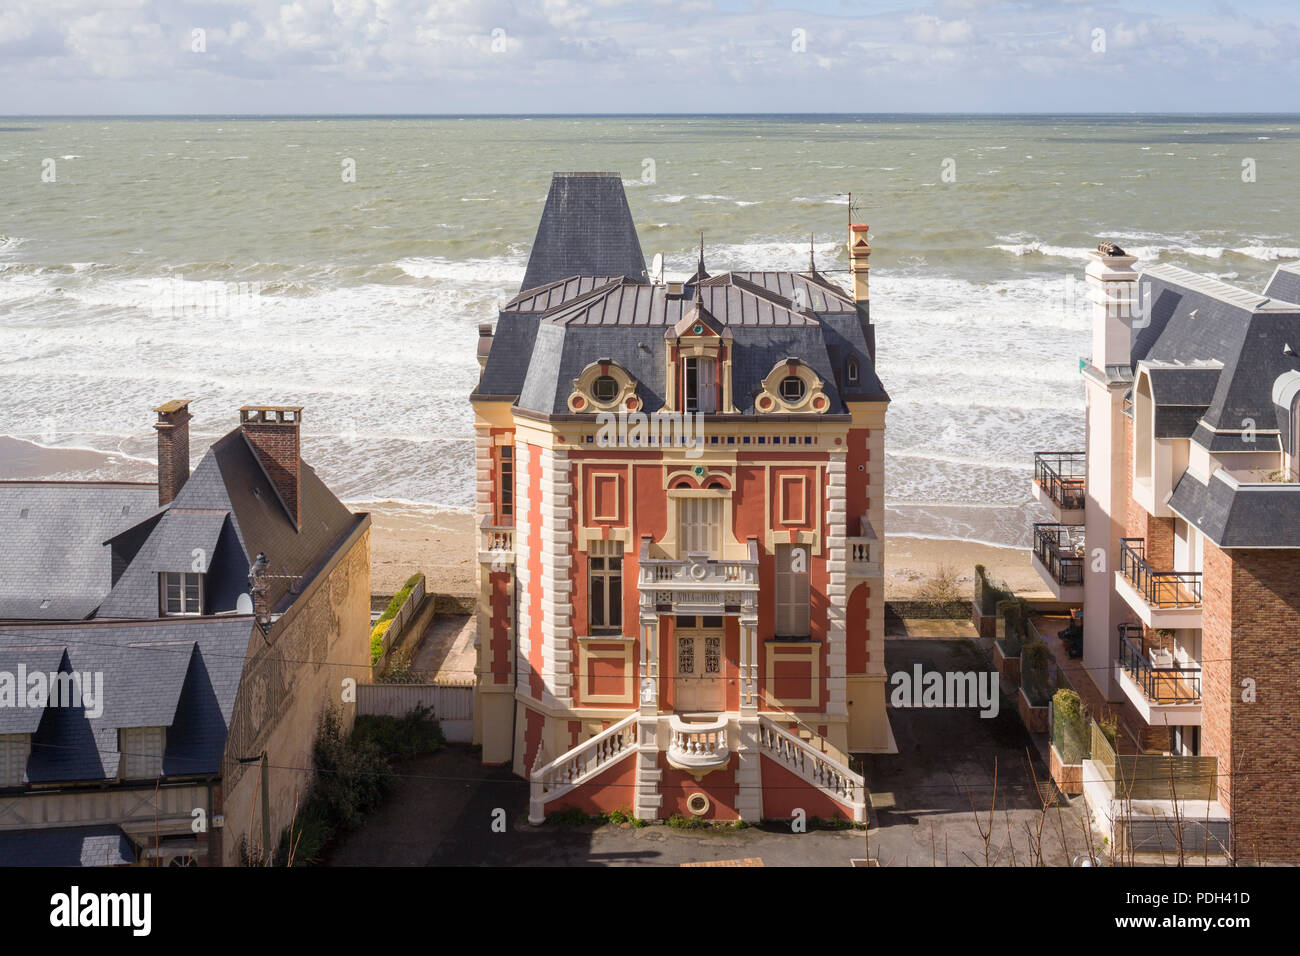 The 'Villa des Flots', a Belle Epoque house on the beach at Trouville-sur-Mer, Normandy, France with rough seas behind Stock Photo